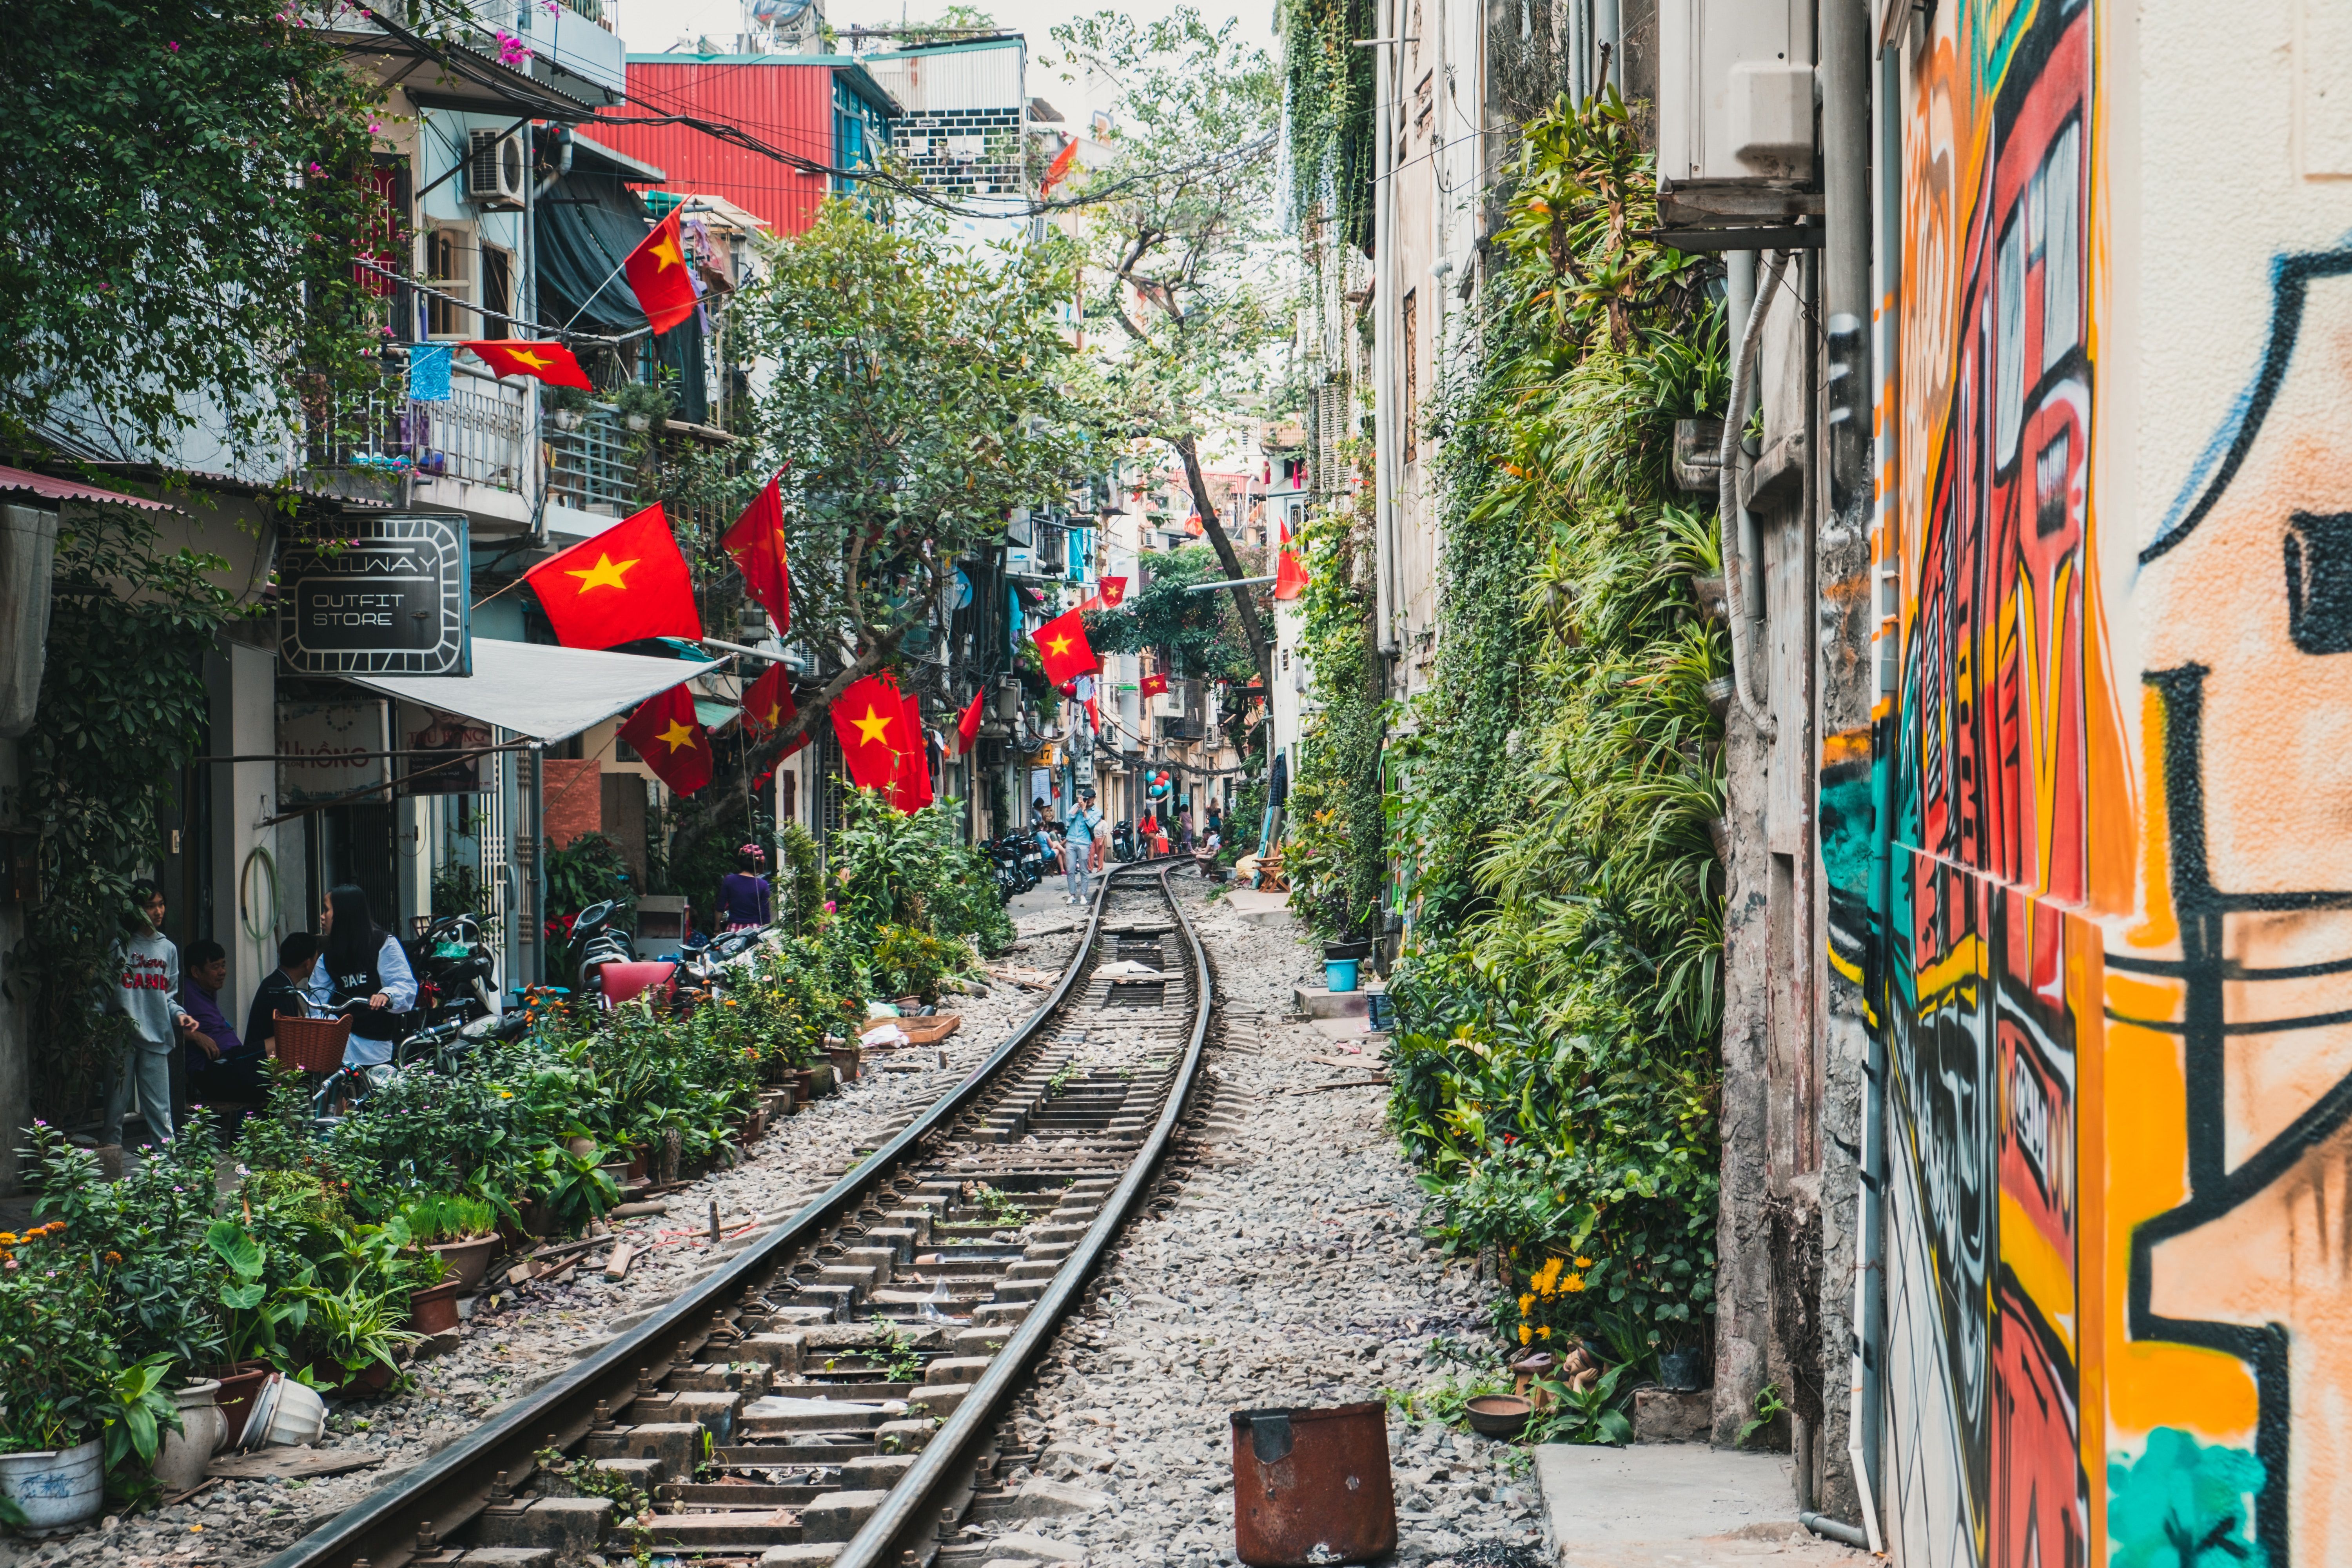 Travelers Will Fall In Love With Wandering Hanoi While Finding Surprises Around Every Corner